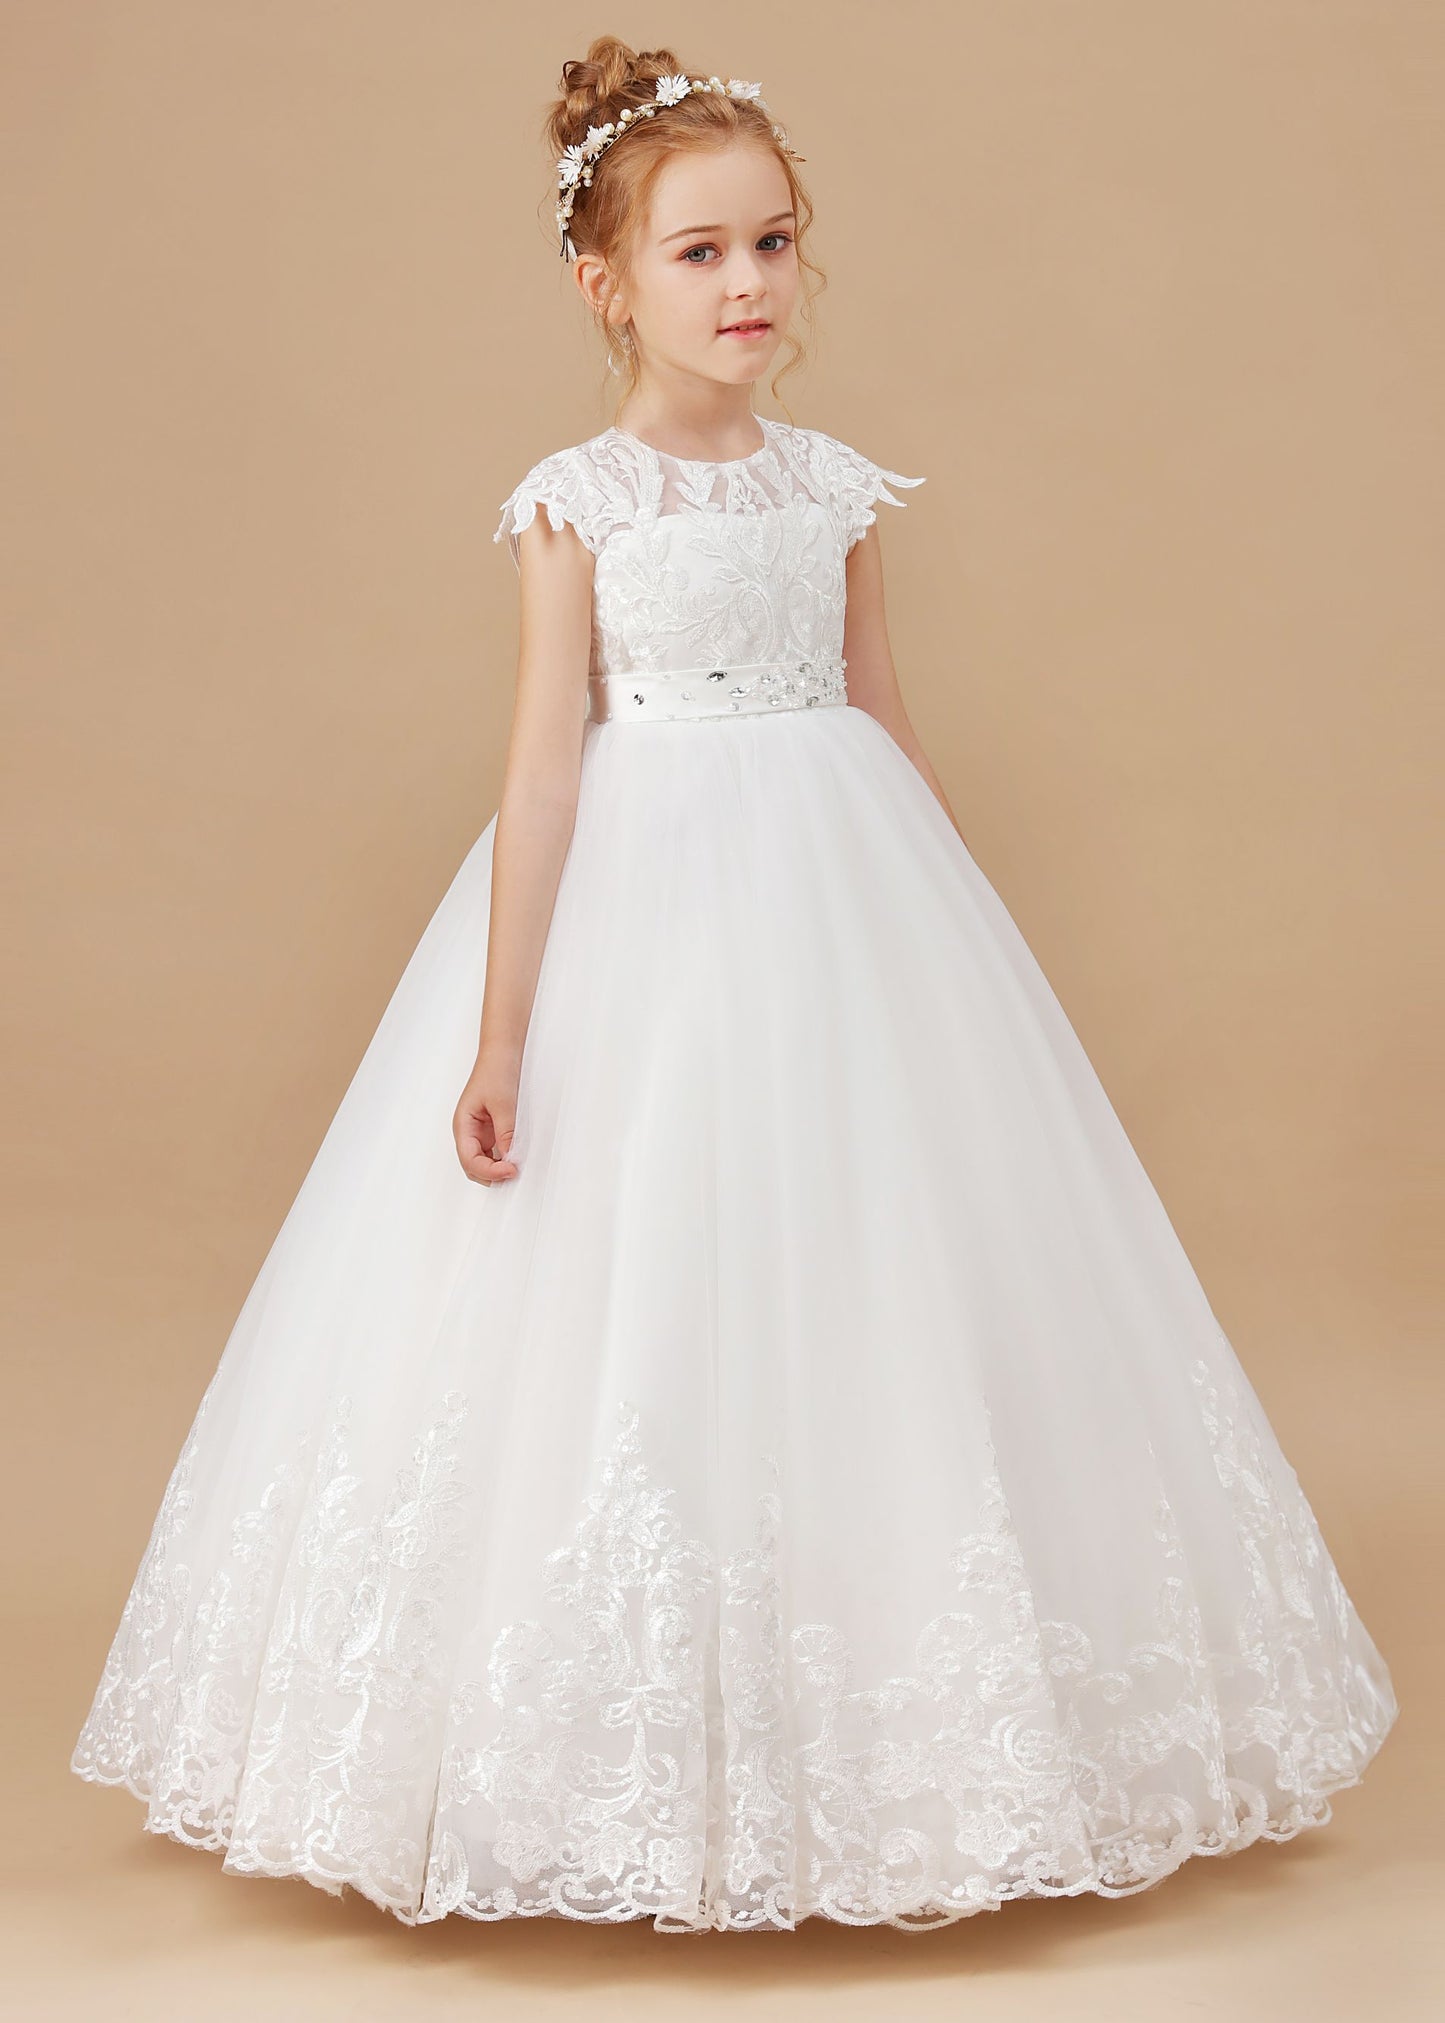 Princess Lace Tulle Satin Flower Girl Dresses With Bowknot